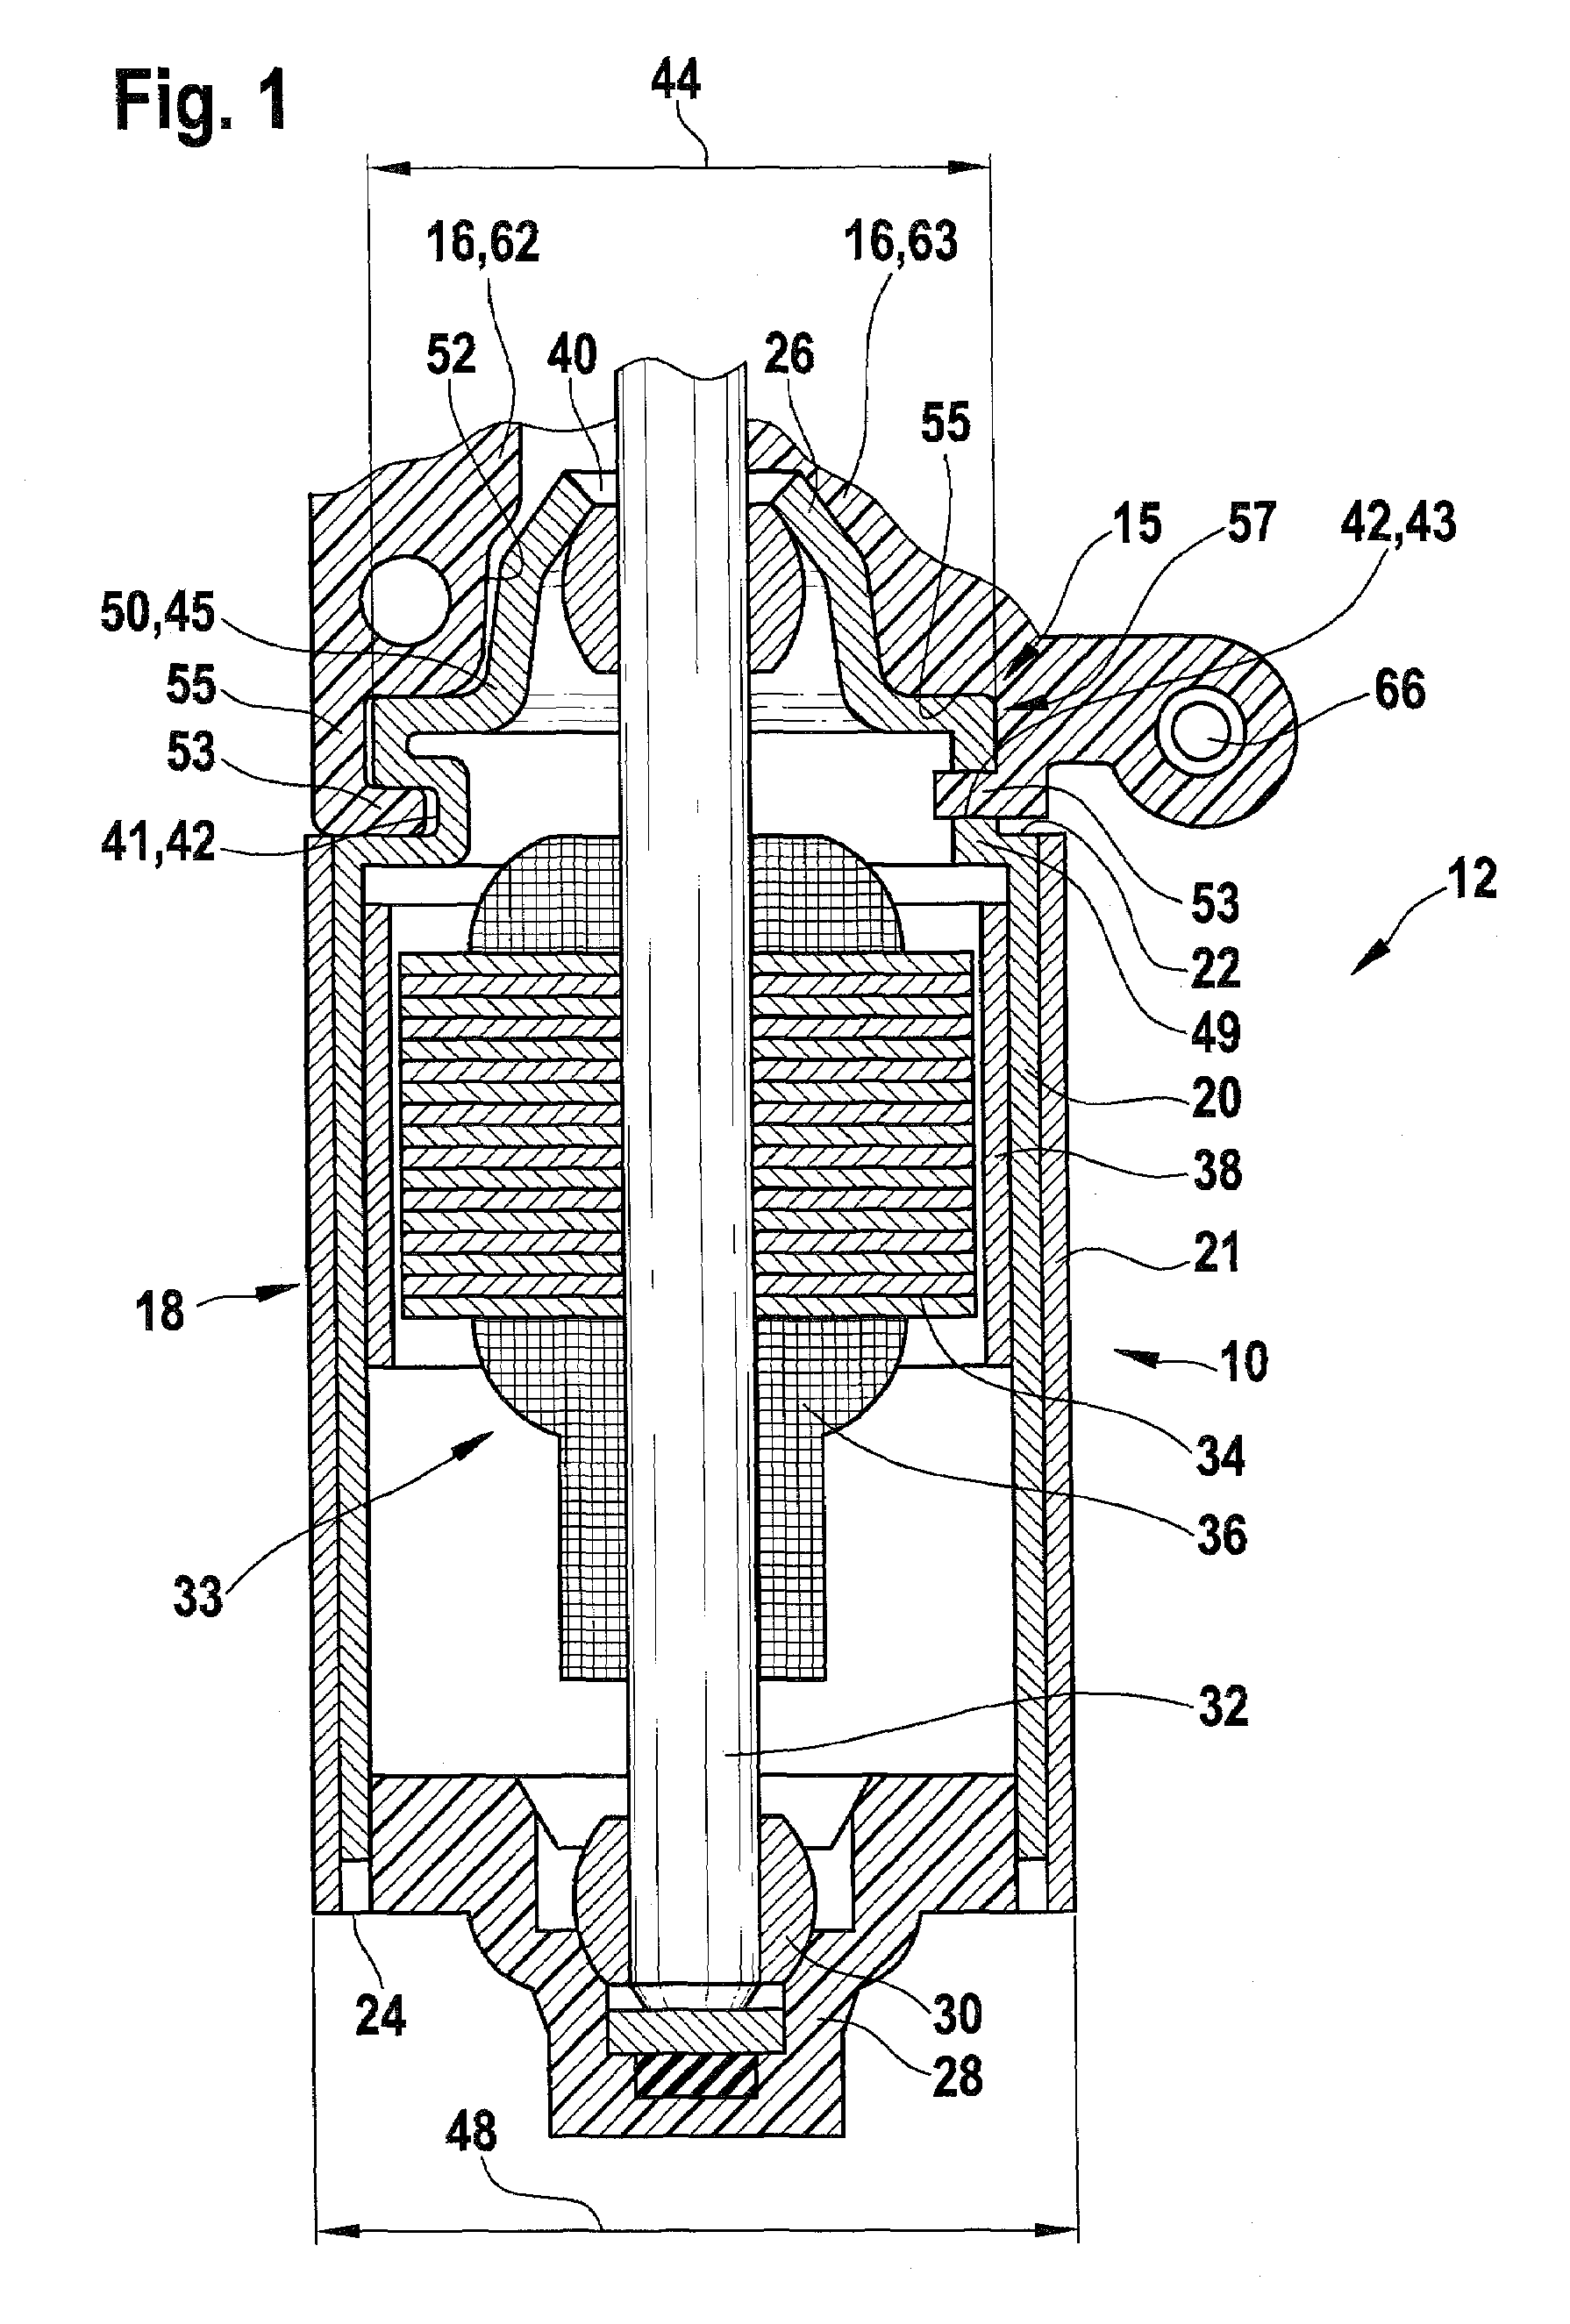 Electric motor housing with transmission drive unit interface